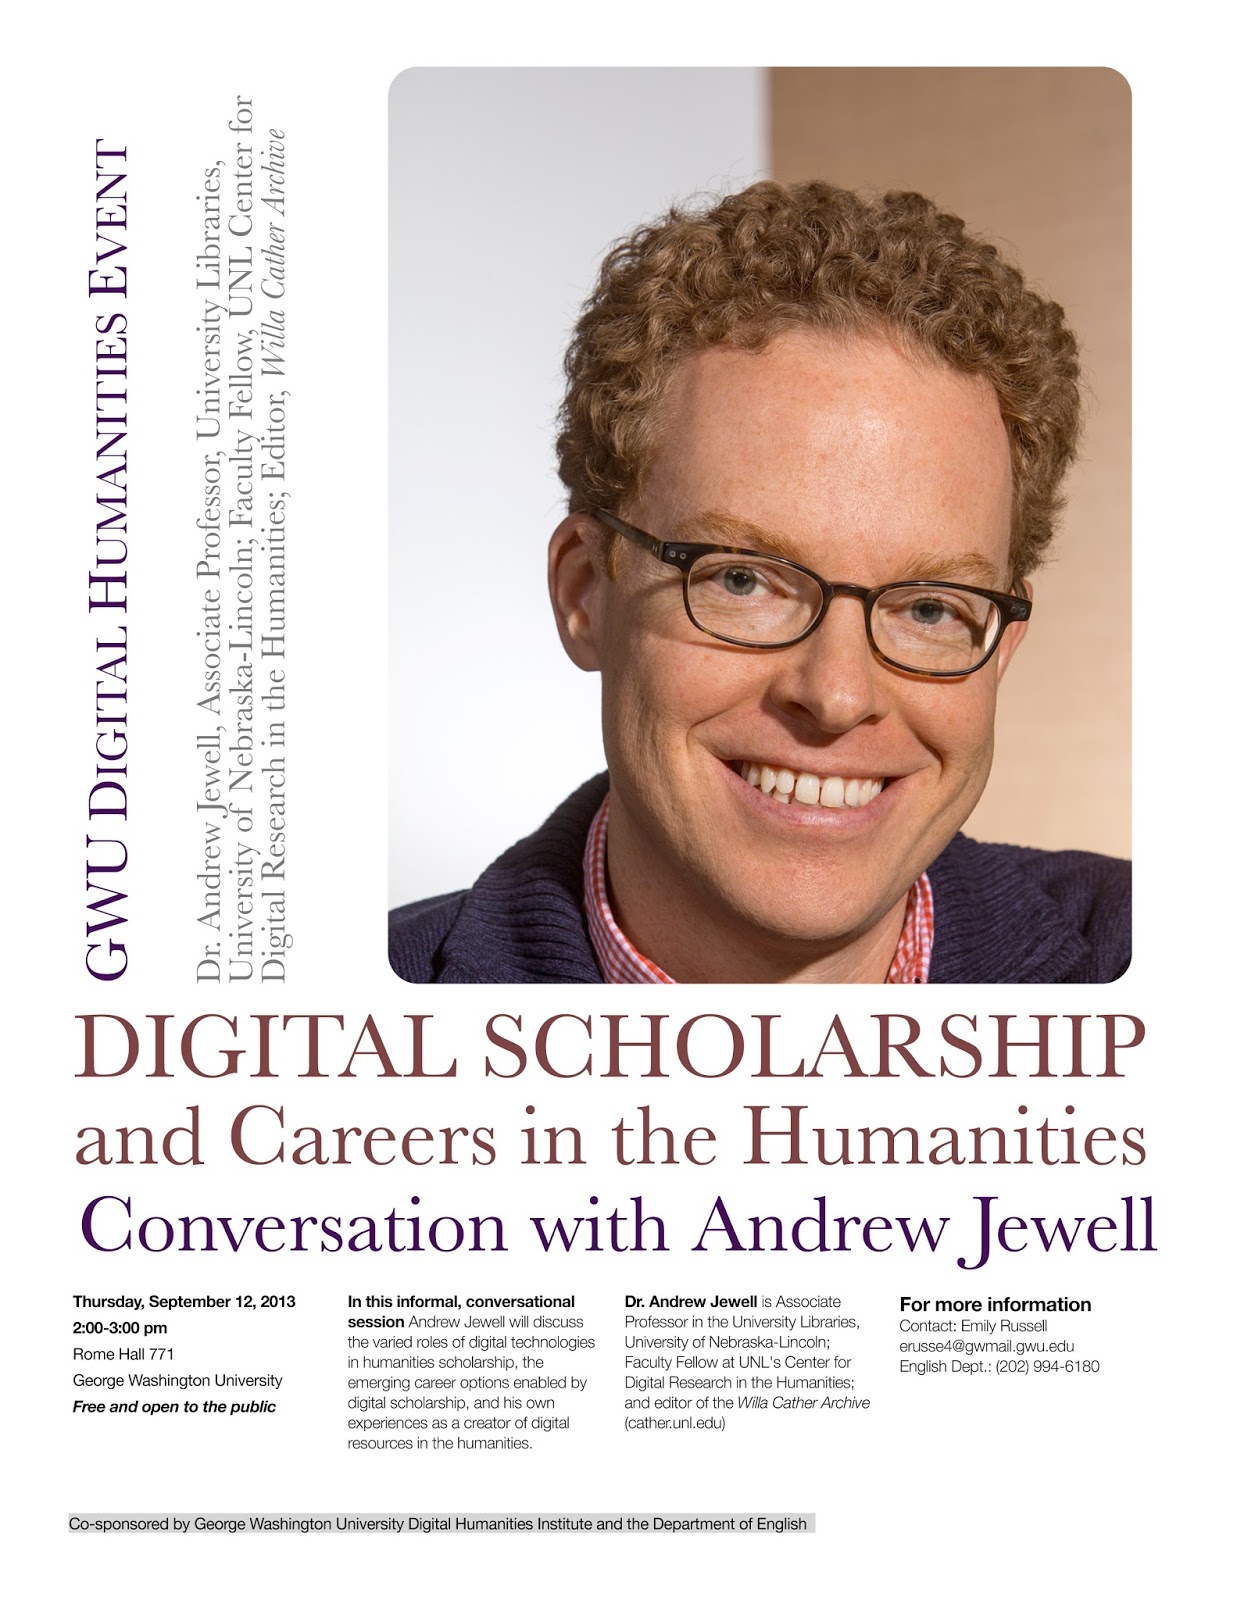 digital-scholarship-and-careers-in-the-humanities-department-of-english